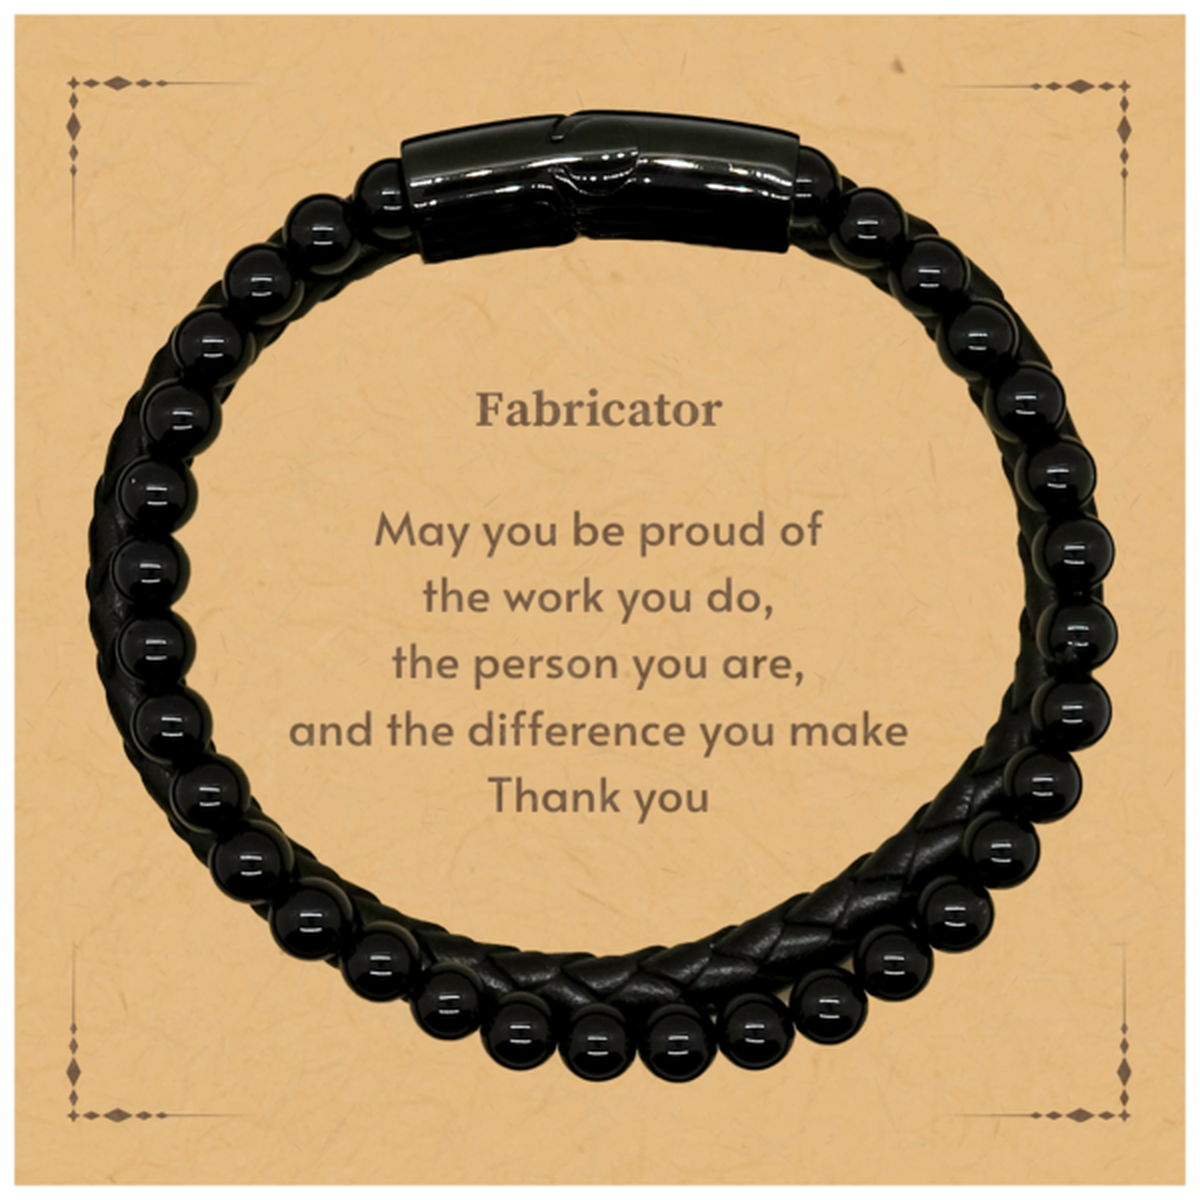 Heartwarming Stone Leather Bracelets Retirement Coworkers Gifts for Fabricator, Fabricator May You be proud of the work you do, the person you are Gifts for Boss Men Women Friends